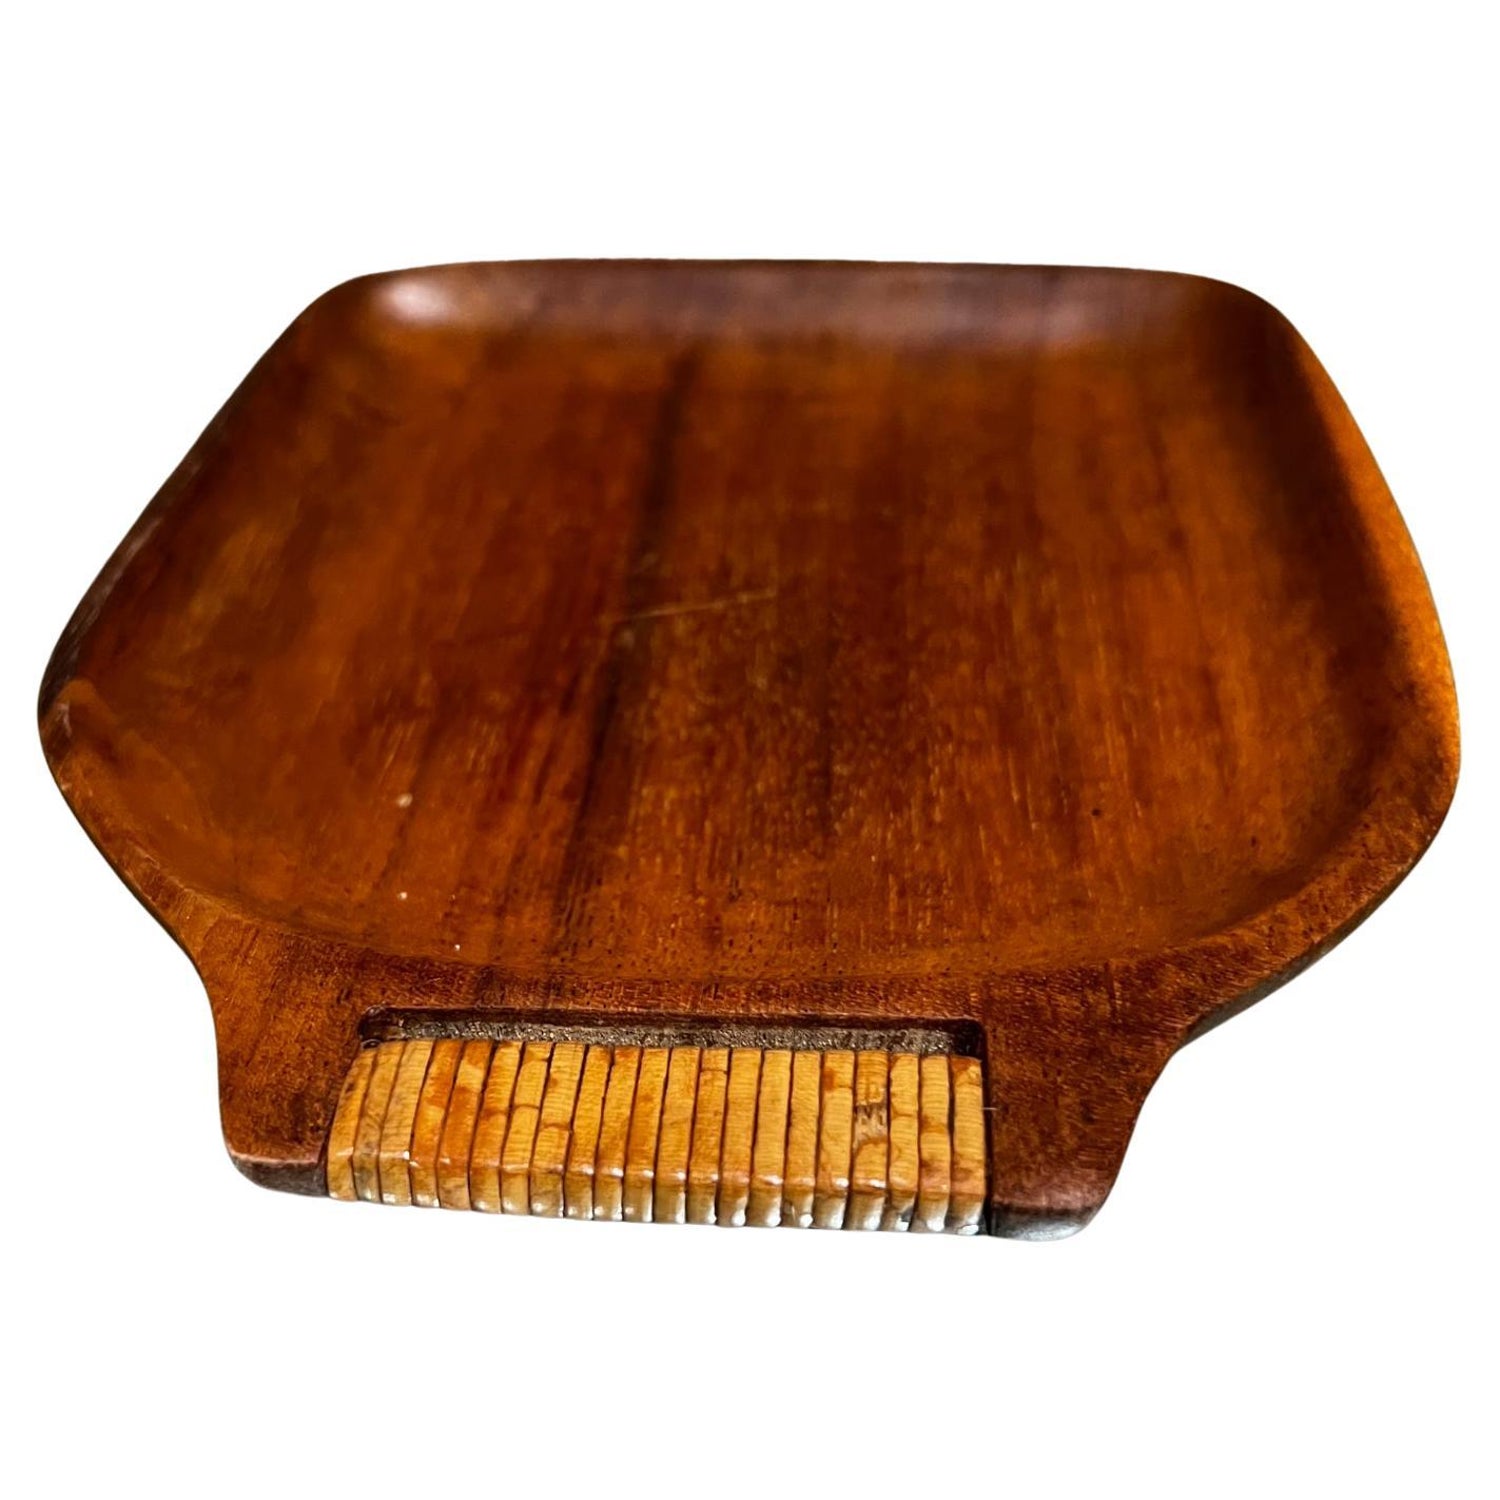 https://a.1stdibscdn.com/1960s-stylish-modern-teakwood-serving-tray-with-cane-wrapped-handle-for-sale/f_9715/f_337318421681140522529/f_33731842_1681140523016_bg_processed.jpg?width=1500